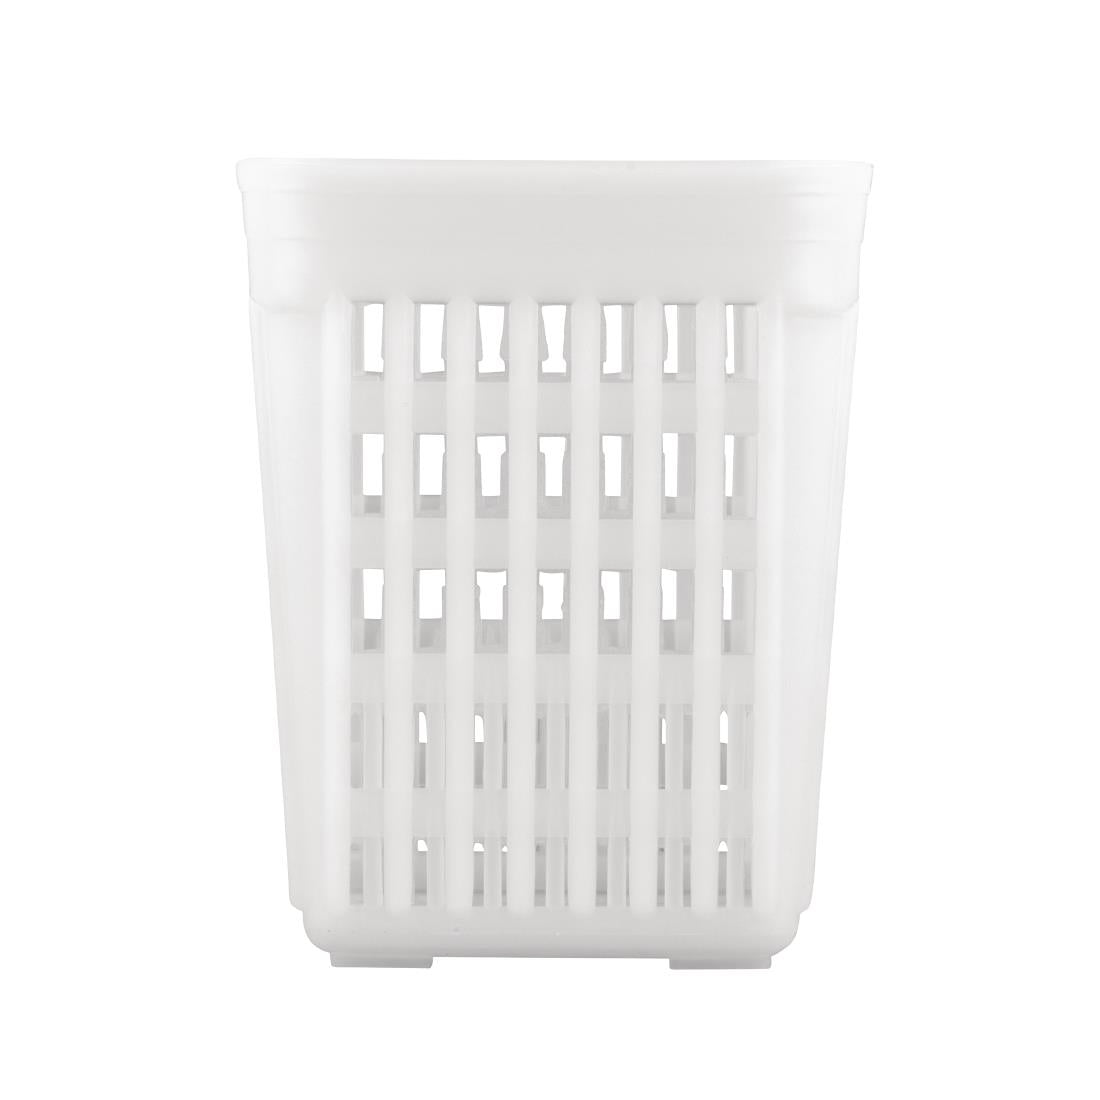 Square Cutlery Basket